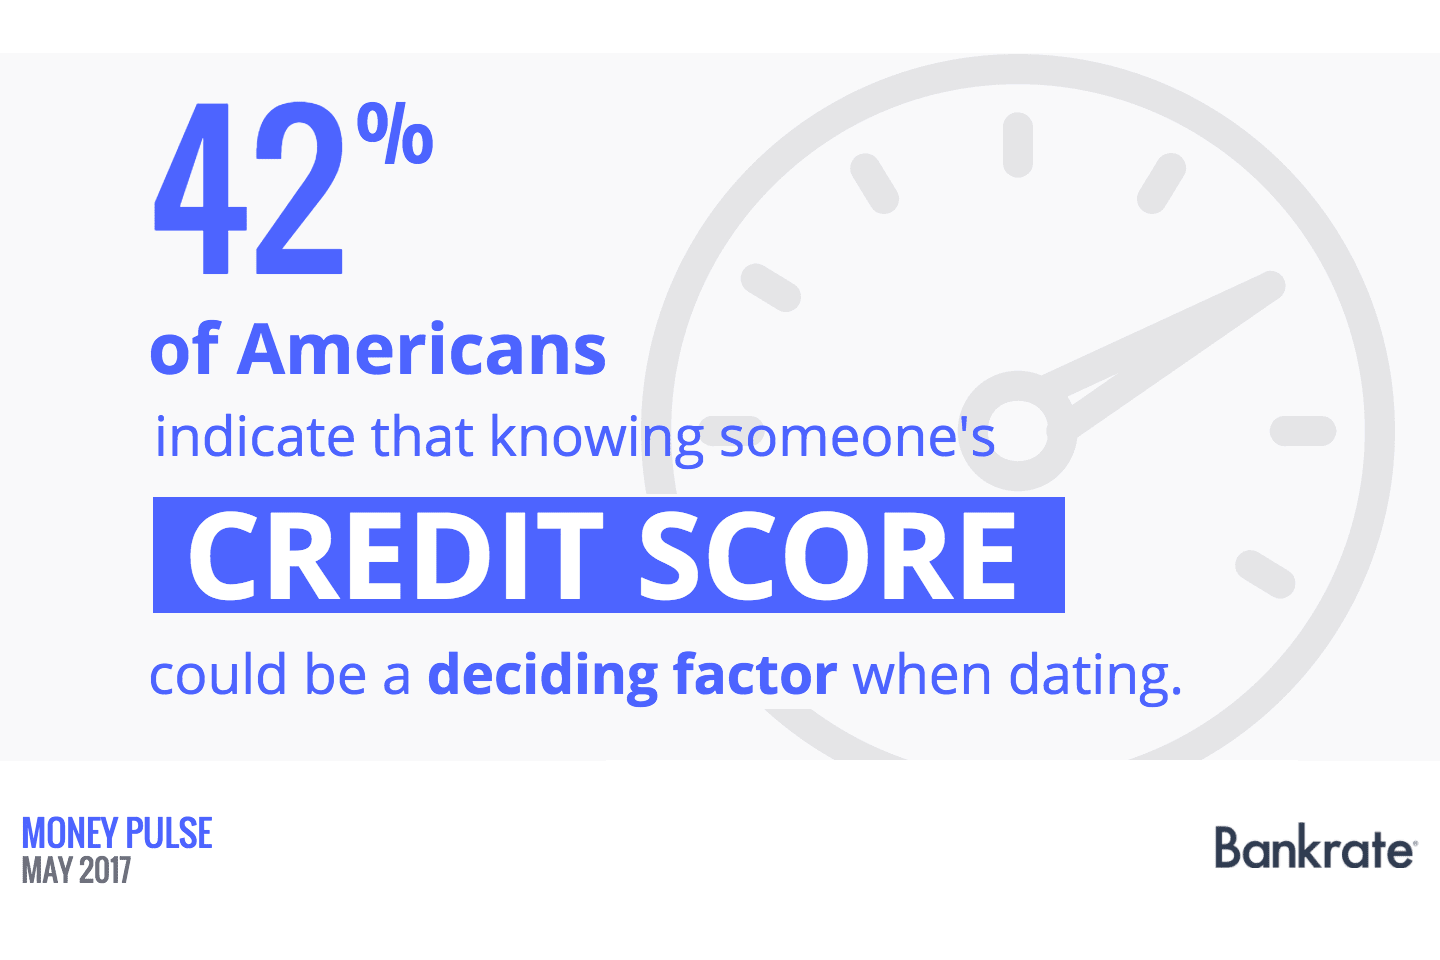 42% of Americans indicate that knowing someone's credit score could be a deciding factor when dating